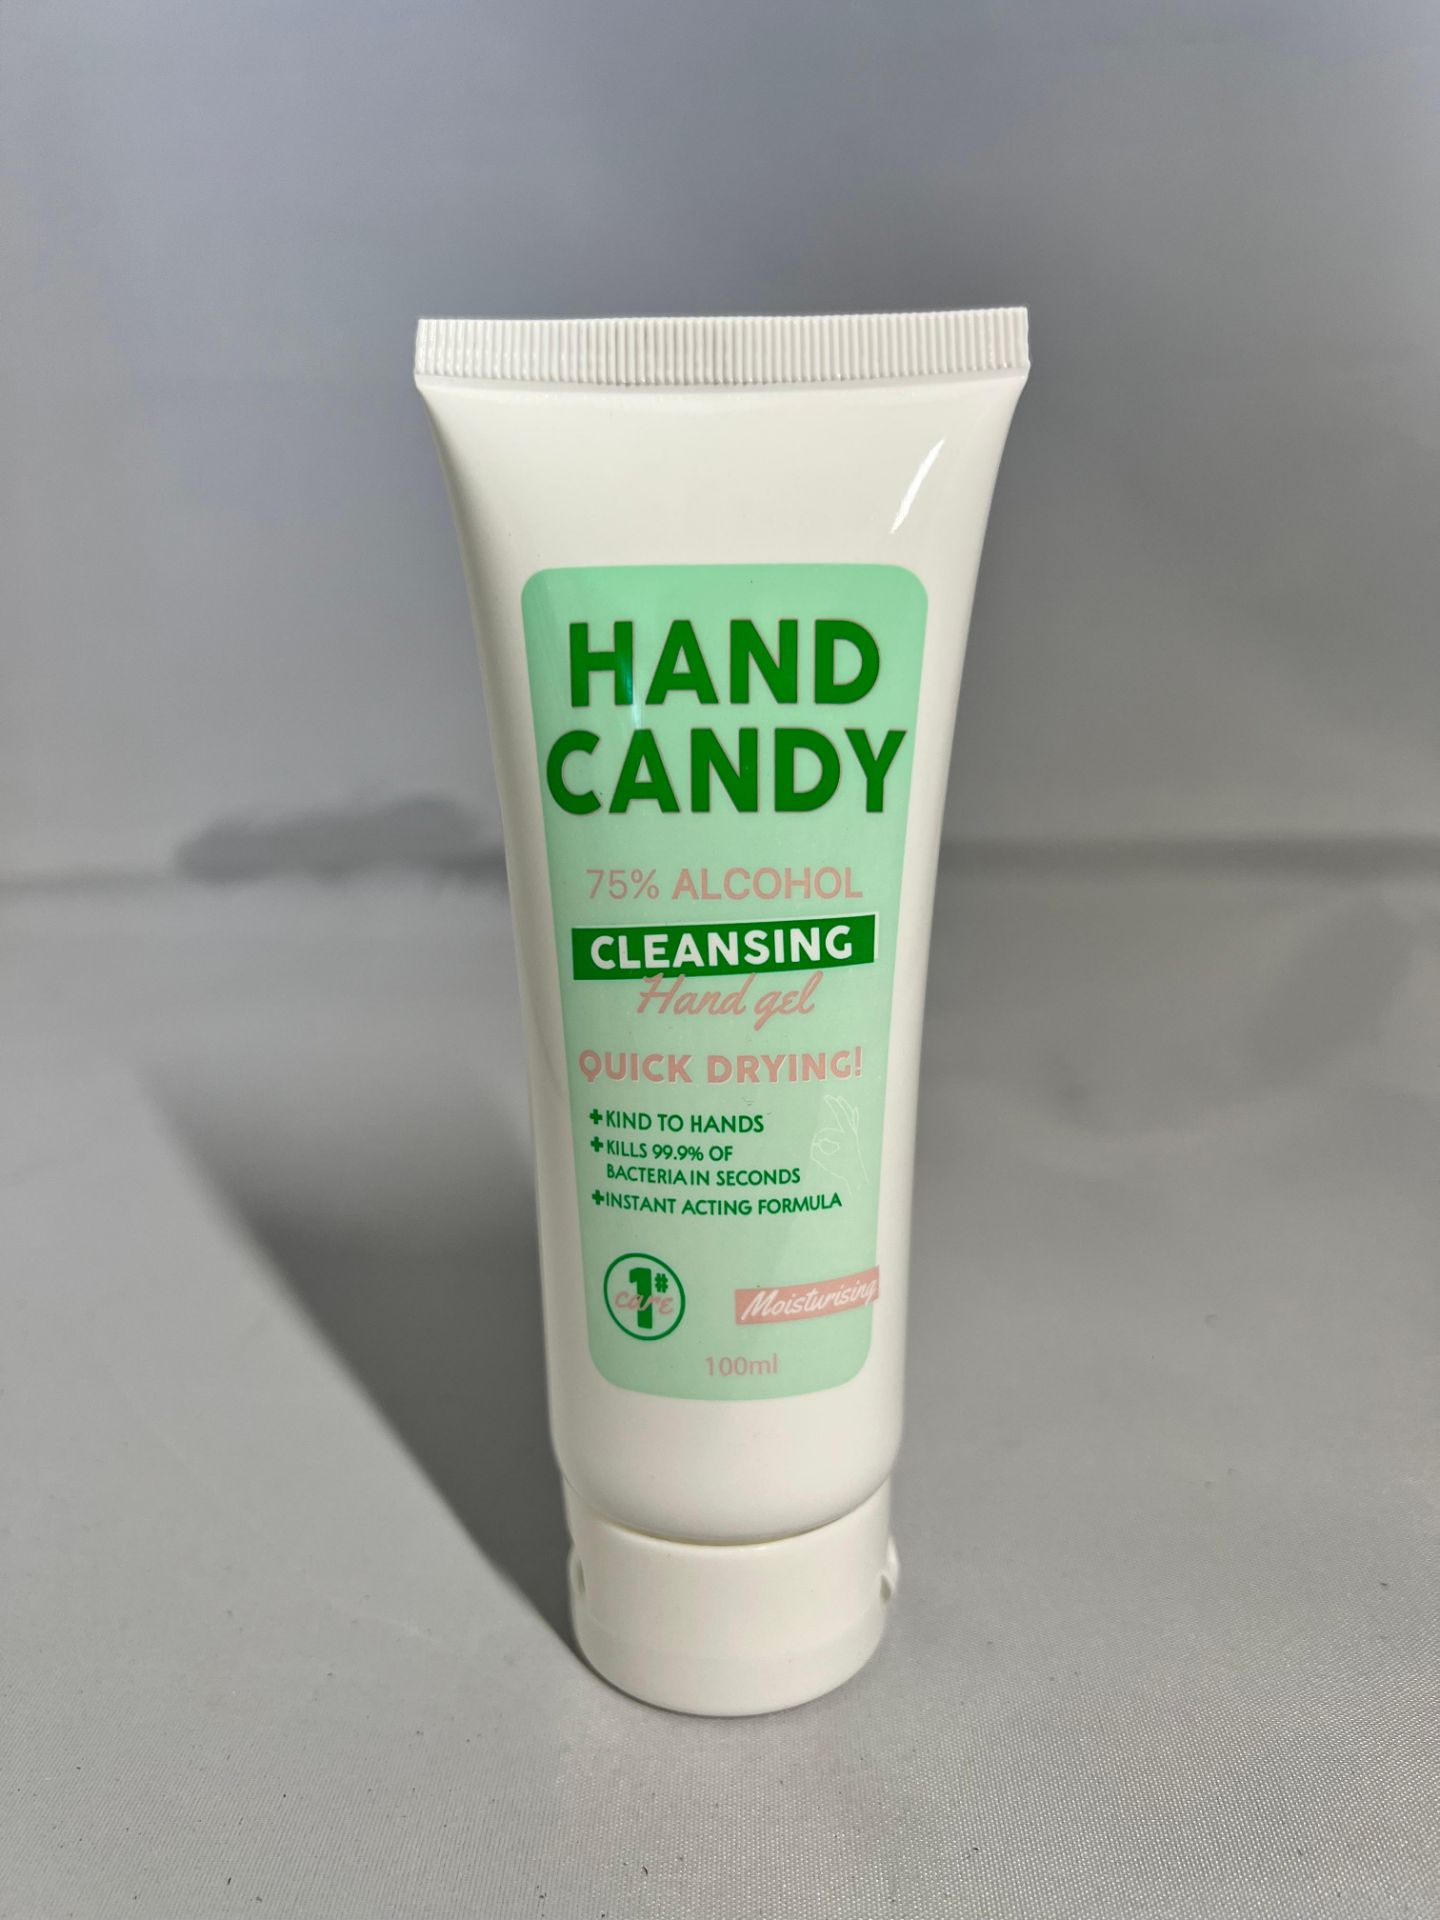 Wholesale Pallet of Hand Candy Sanitiser - Liquidated Stock From Superdrug - Image 2 of 2